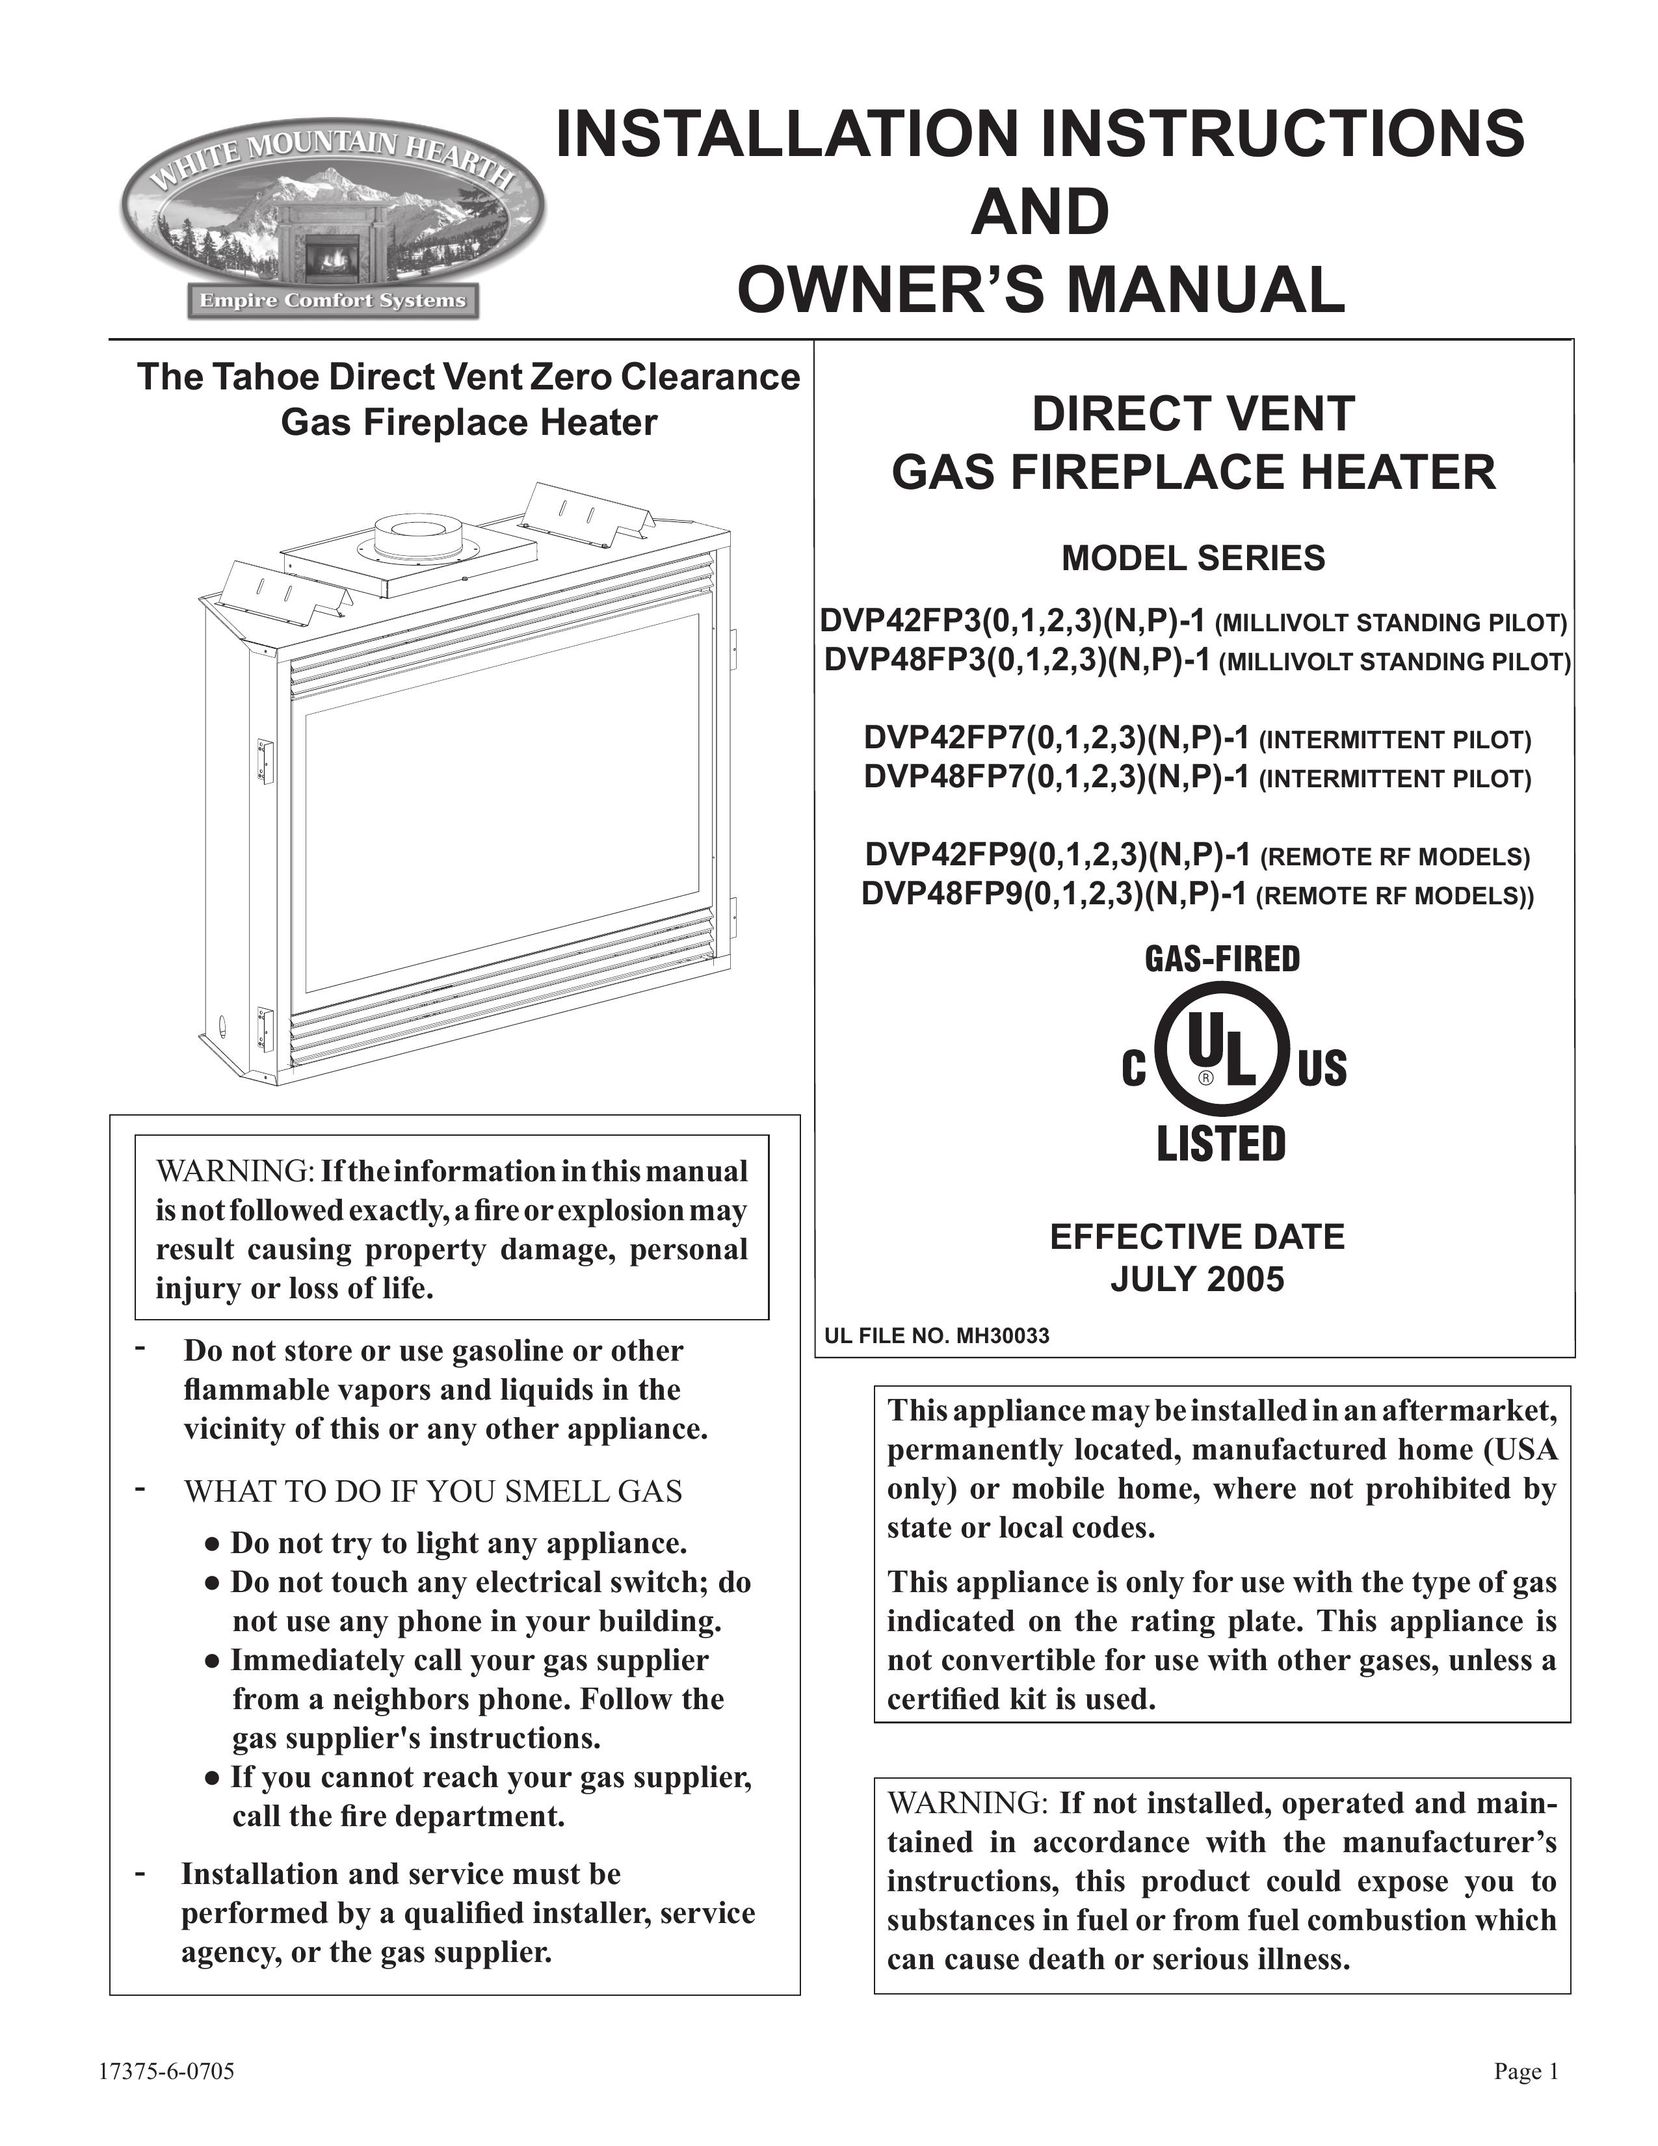 Empire Comfort Systems DVP42FP9 Water Heater User Manual